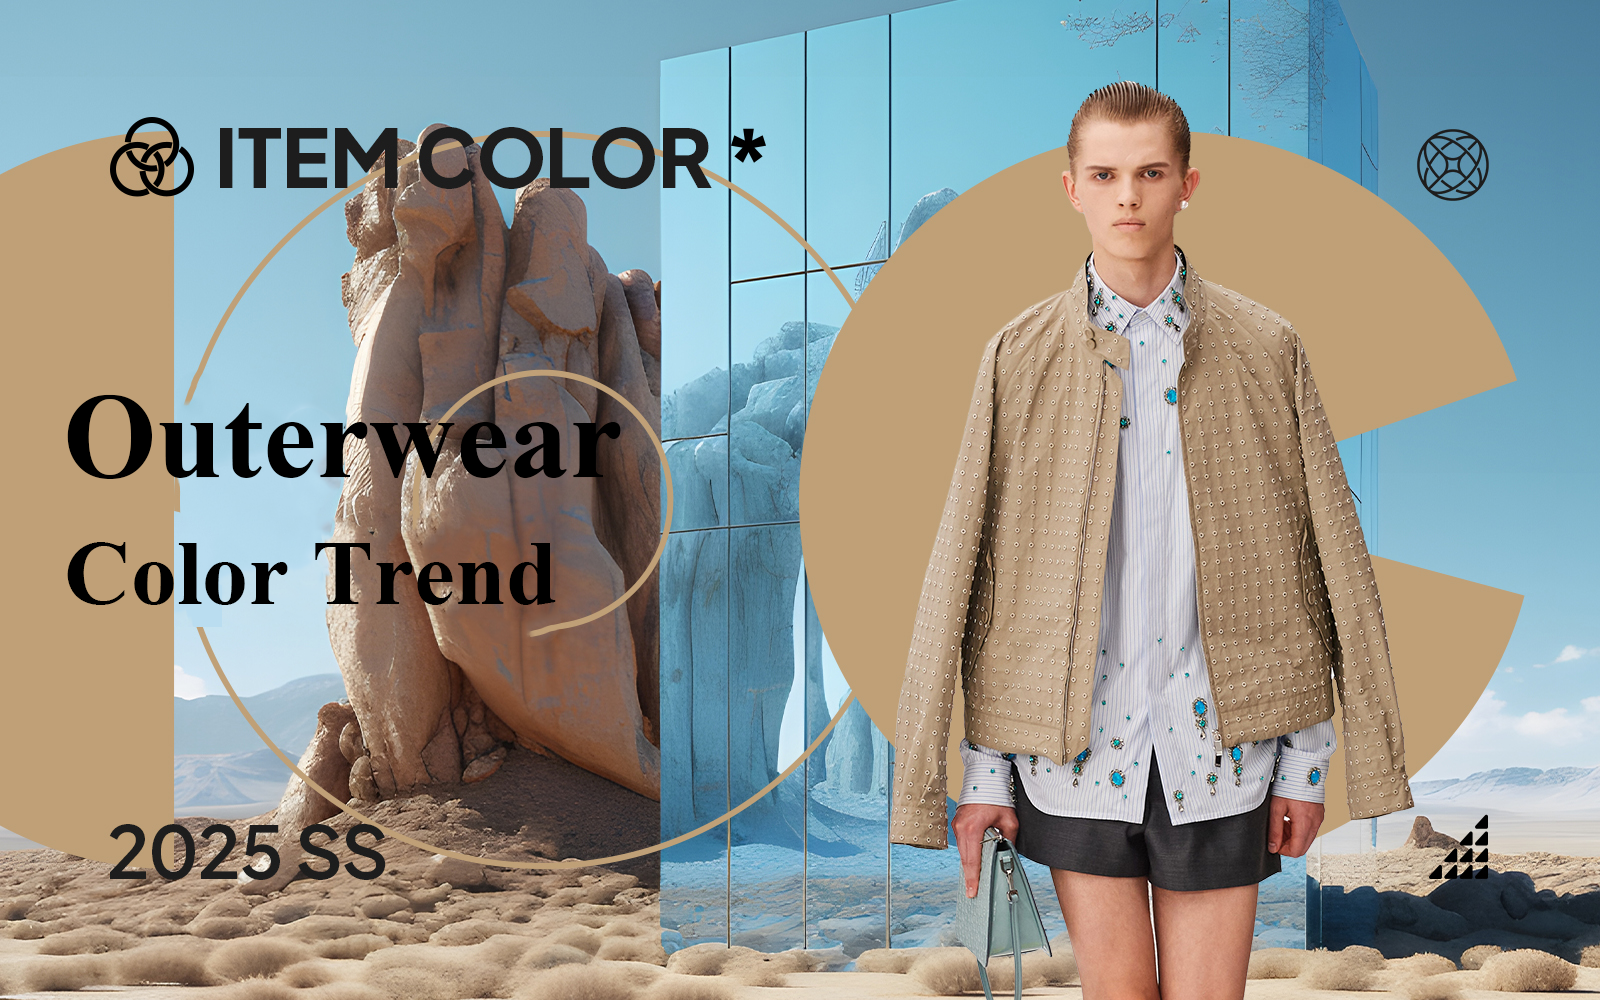 Vitality Reshaping -- The Color Trend for Men's Outerwear